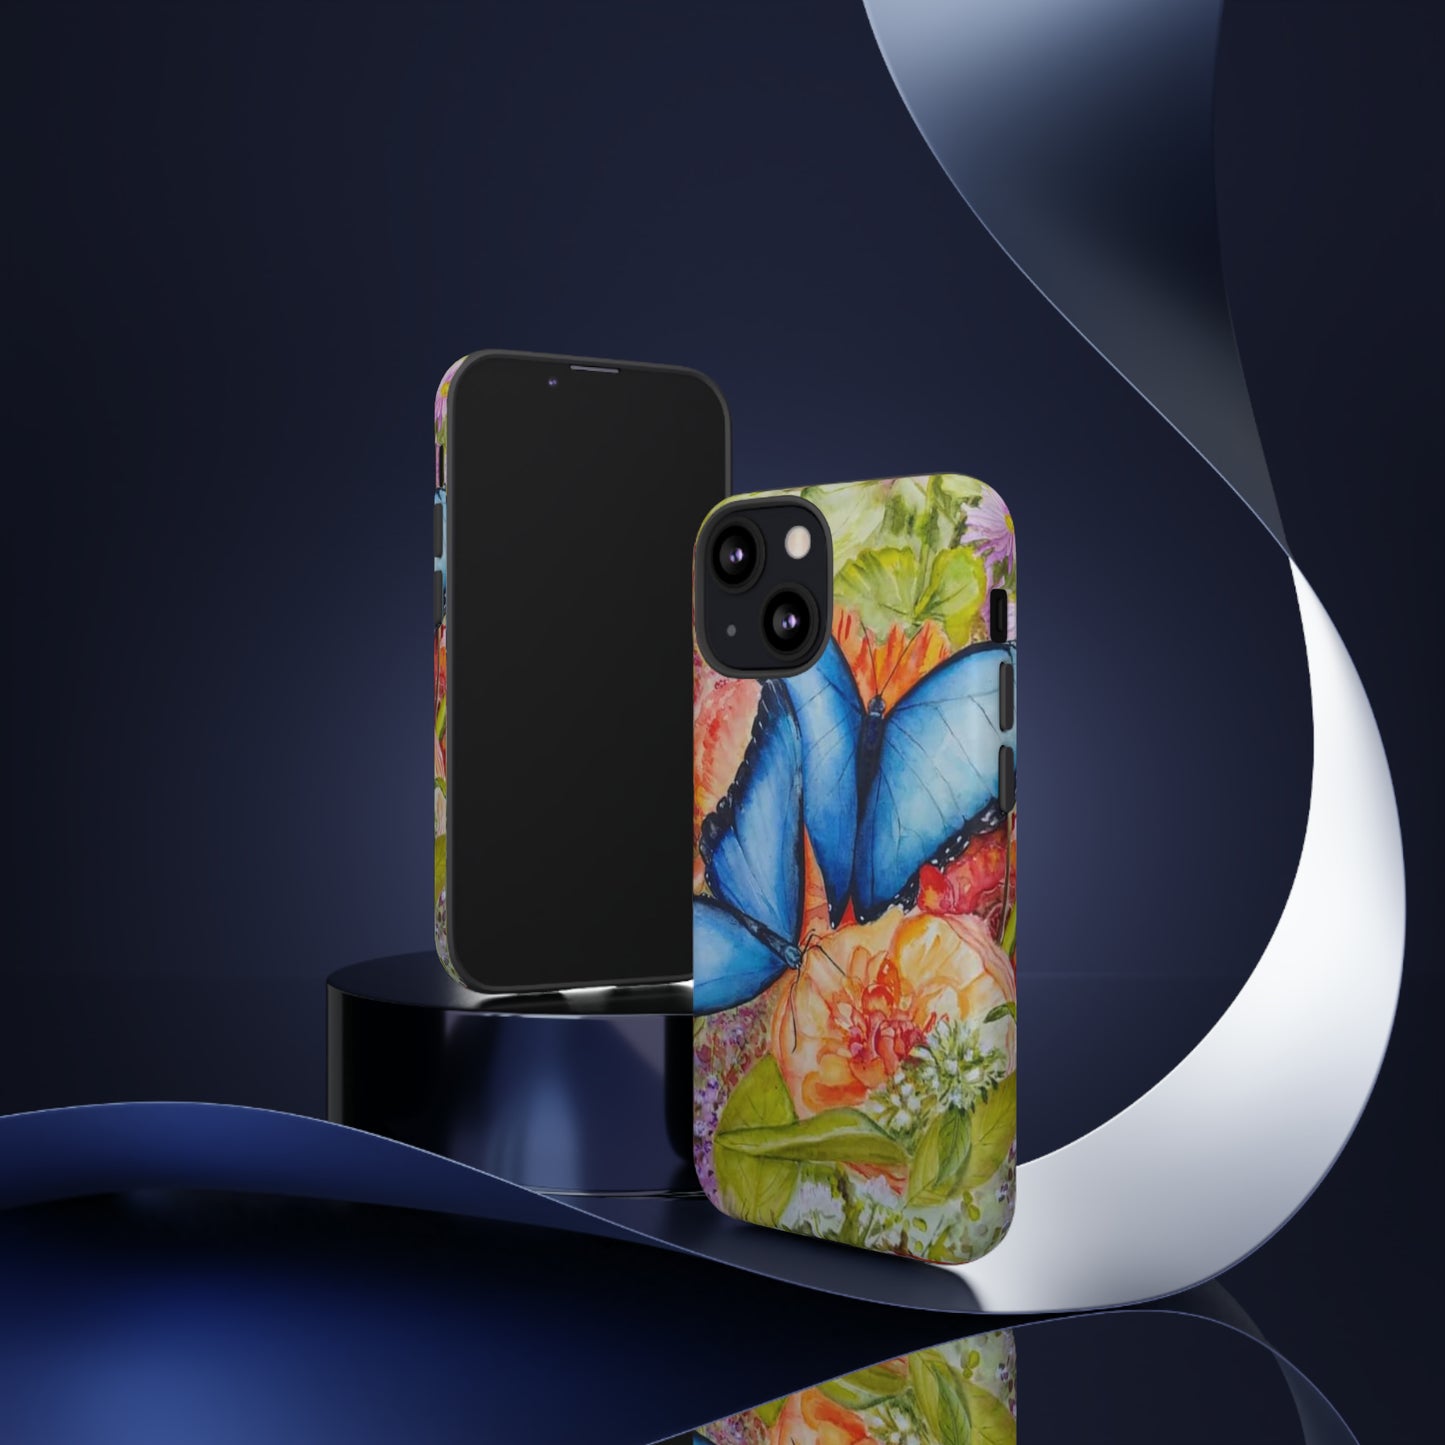 California Blue Butterfly - All IPhone and Samsung Tough Cases